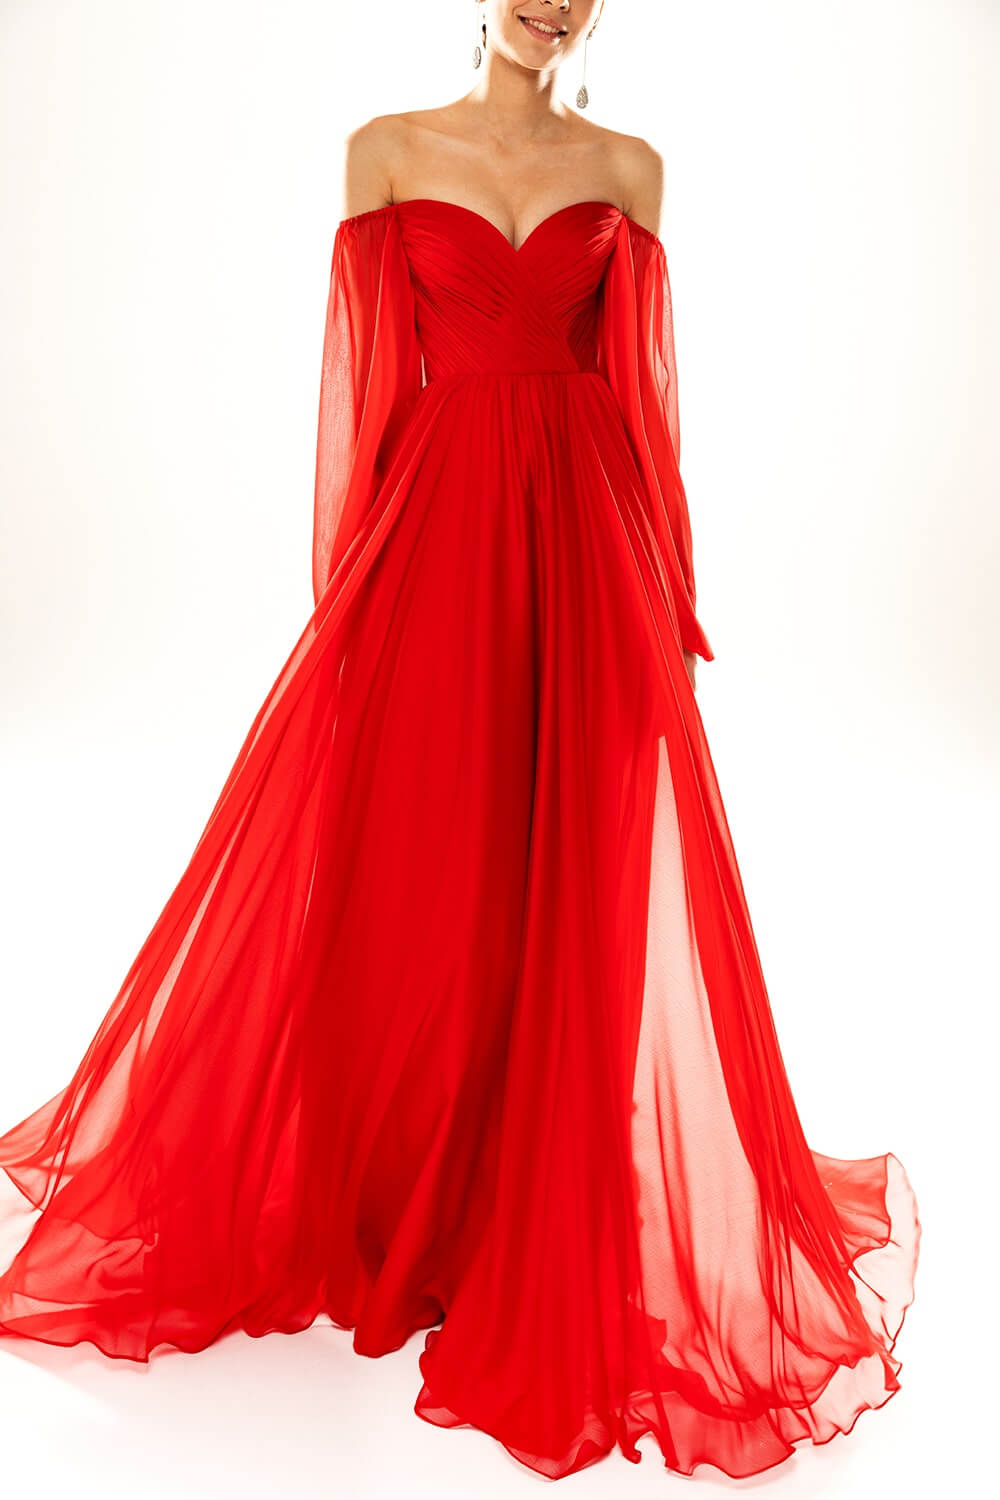 red long evening gown strapless